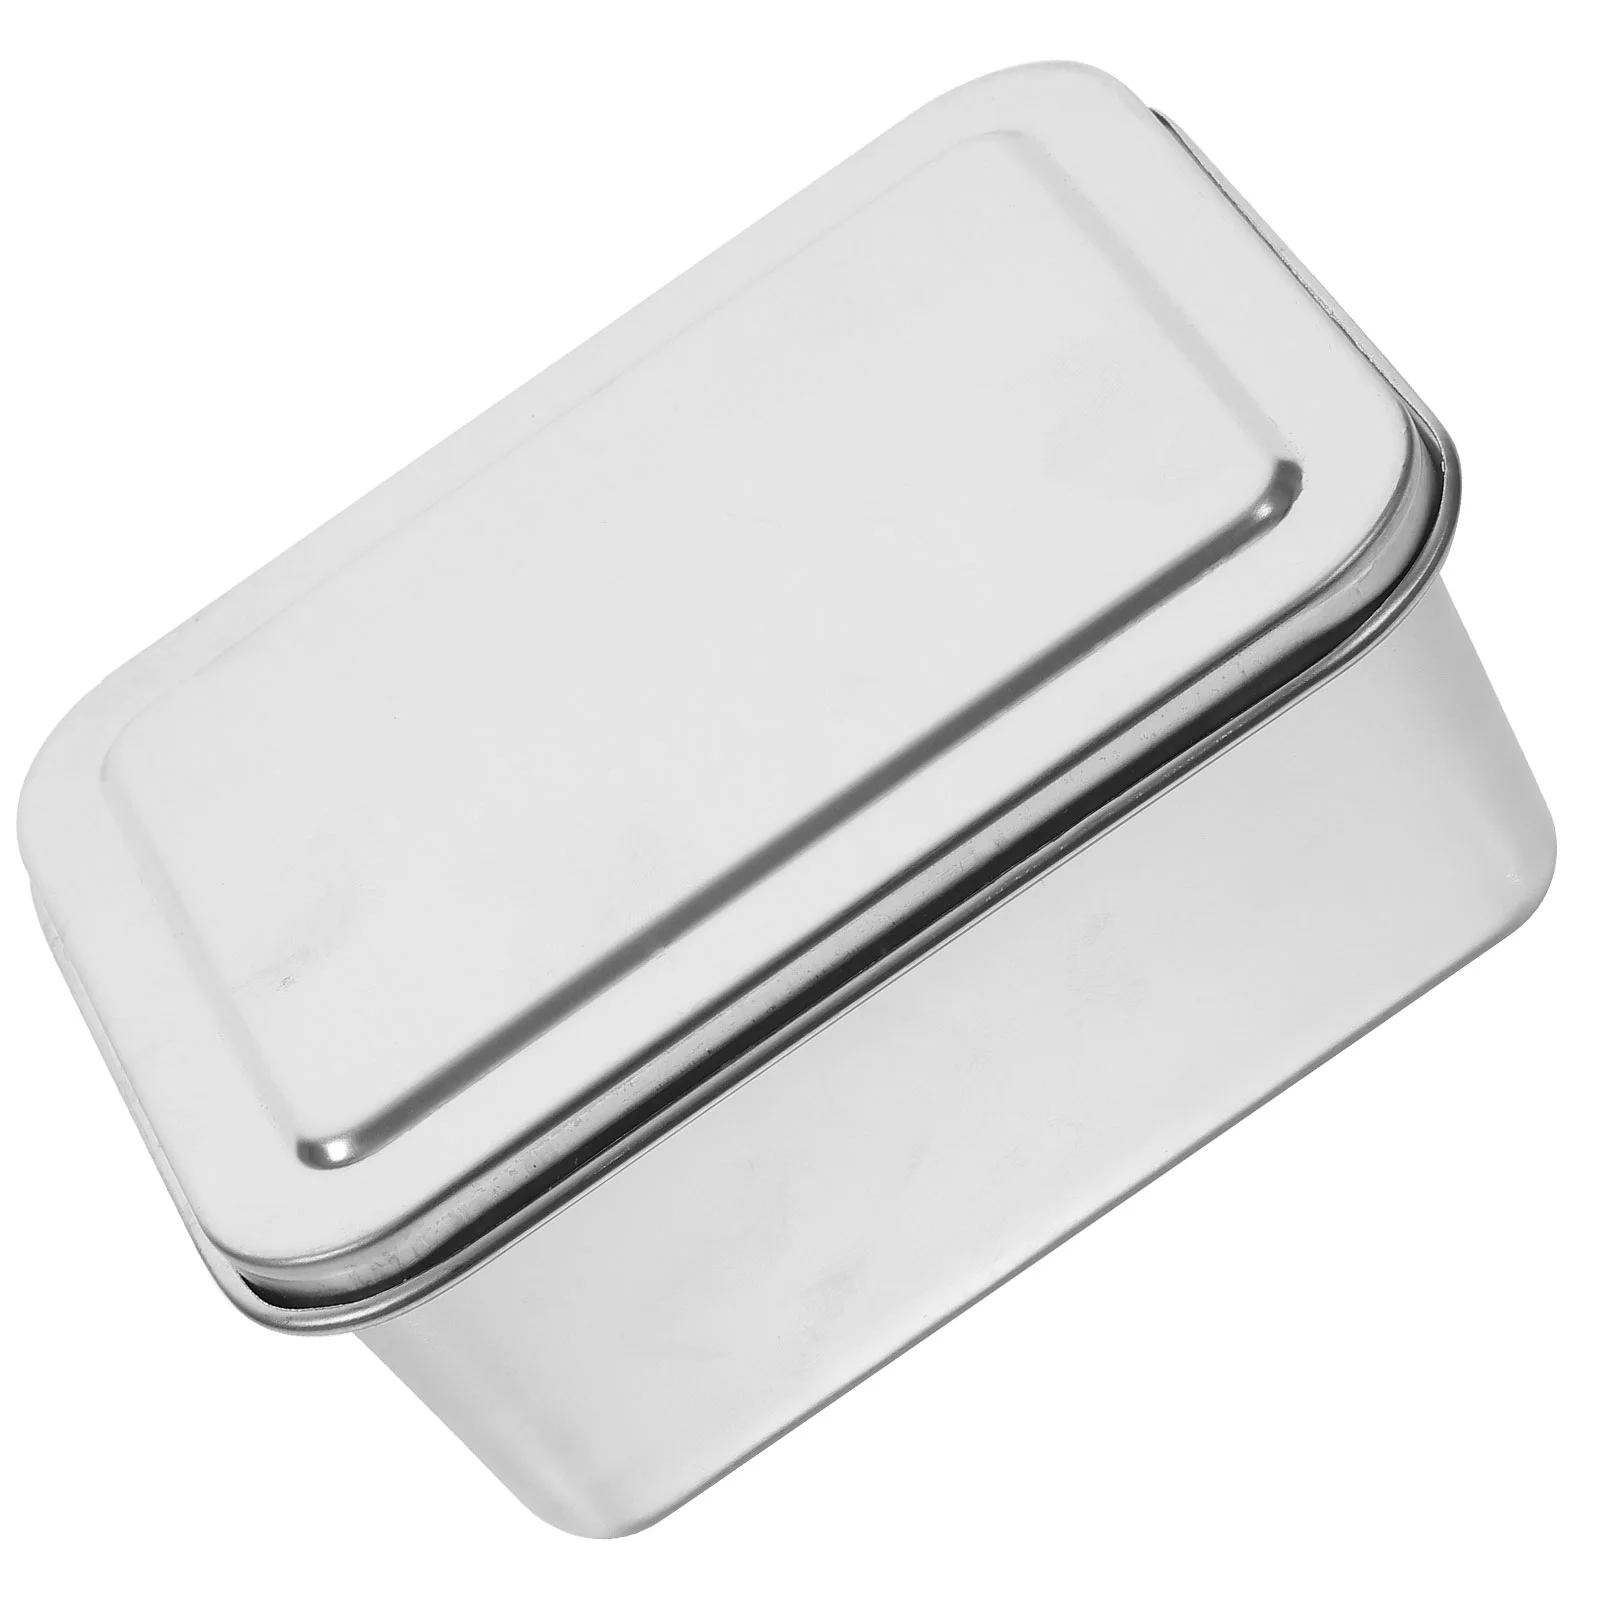 

Stainless Steel Cake Pan Bakeware Household Baking Nonstick Pans Mousse Molds Rectangle Bread Storage Cookie Container